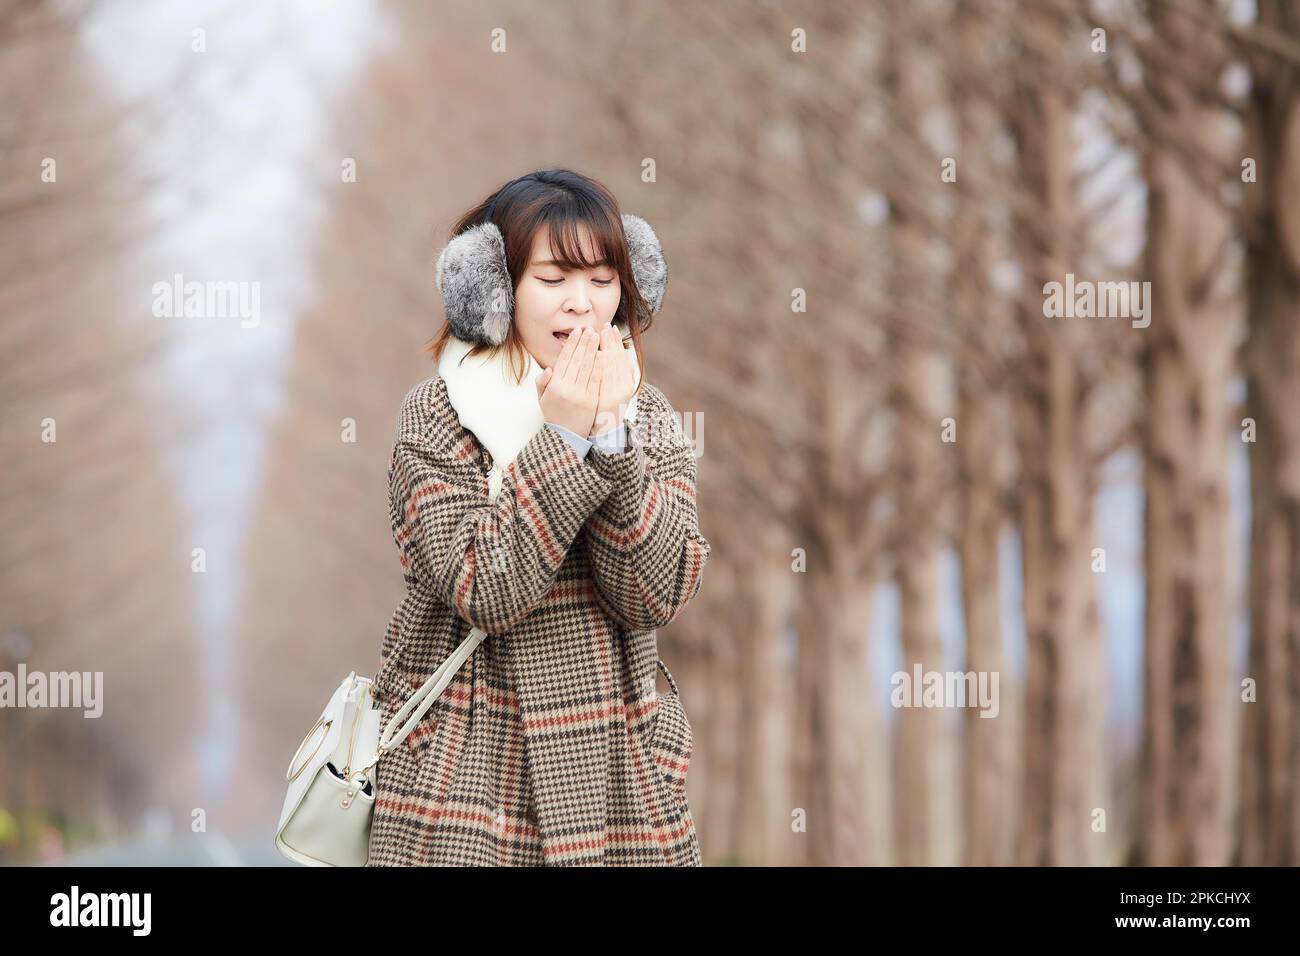 A woman looking cold on a road lined with dead trees Stock Photo